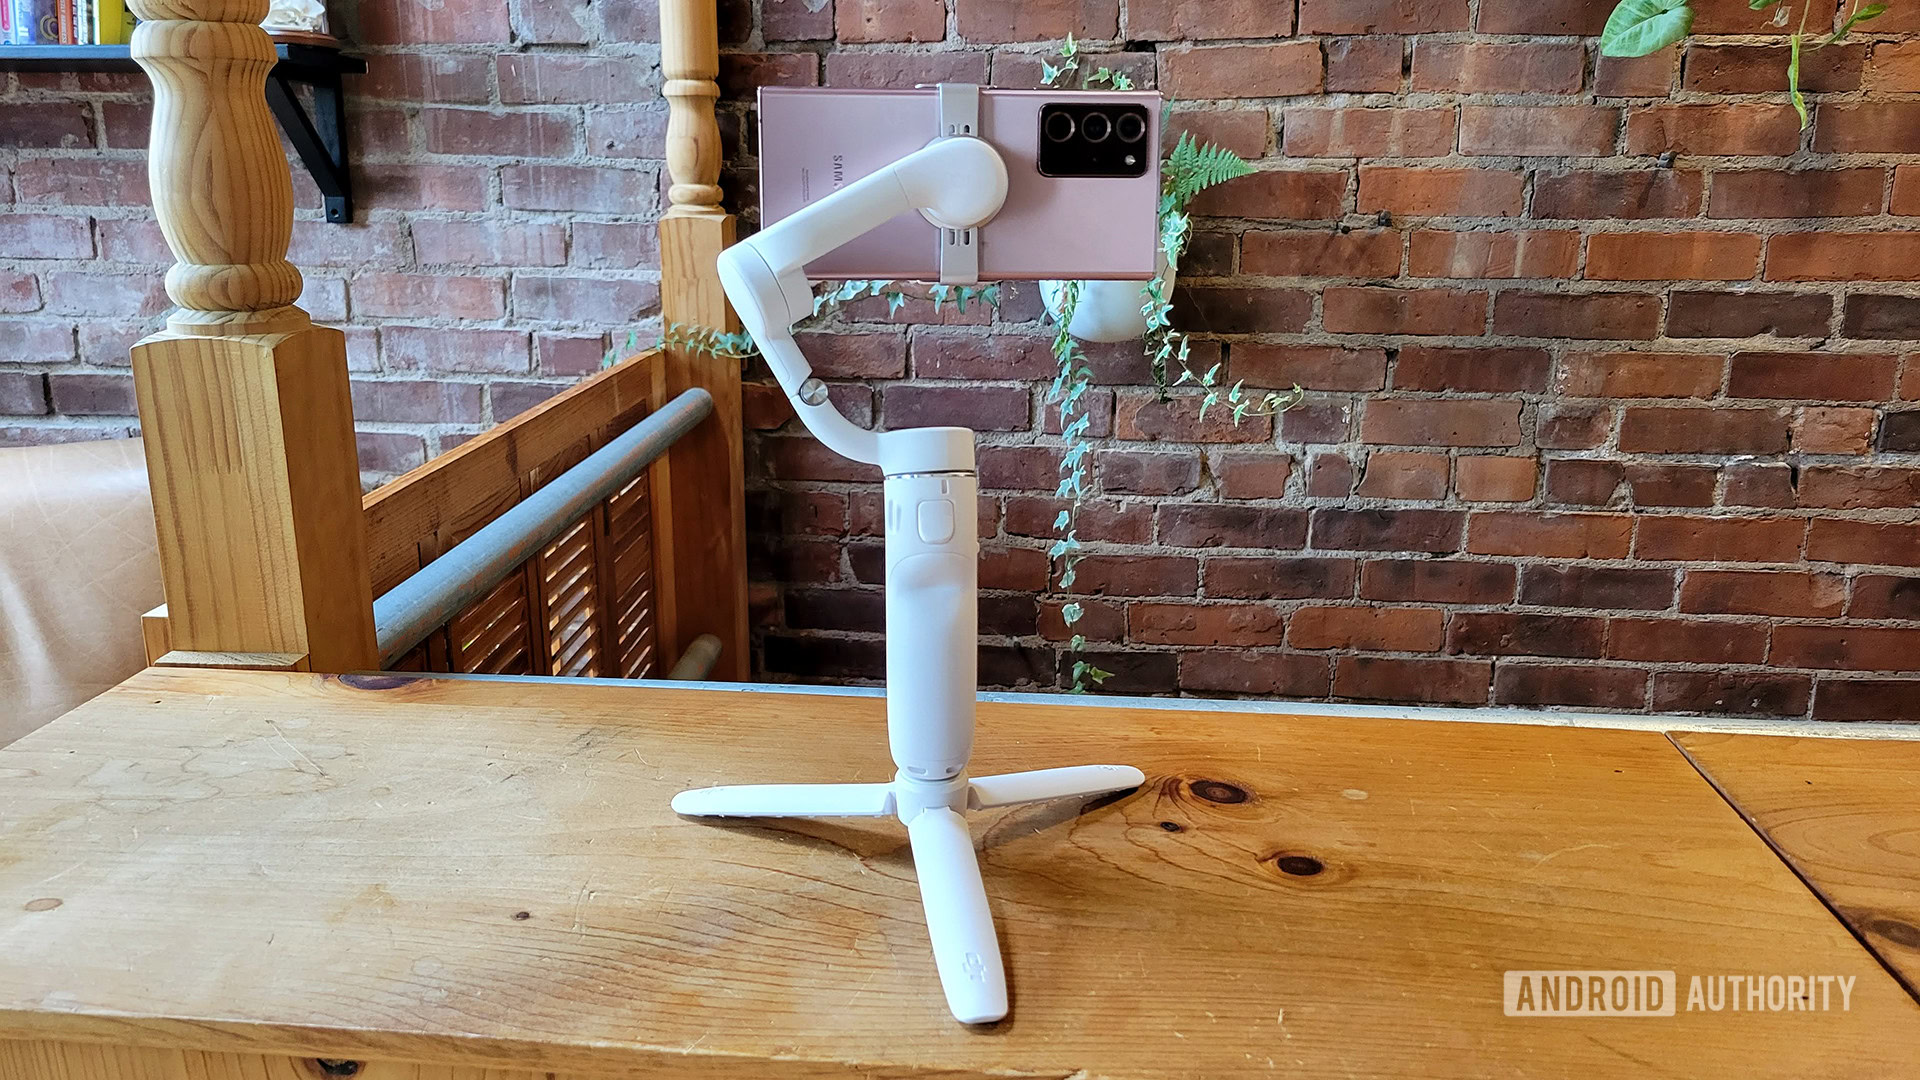 DJI OM 5 Review On Tripod Stand with Phone Attached